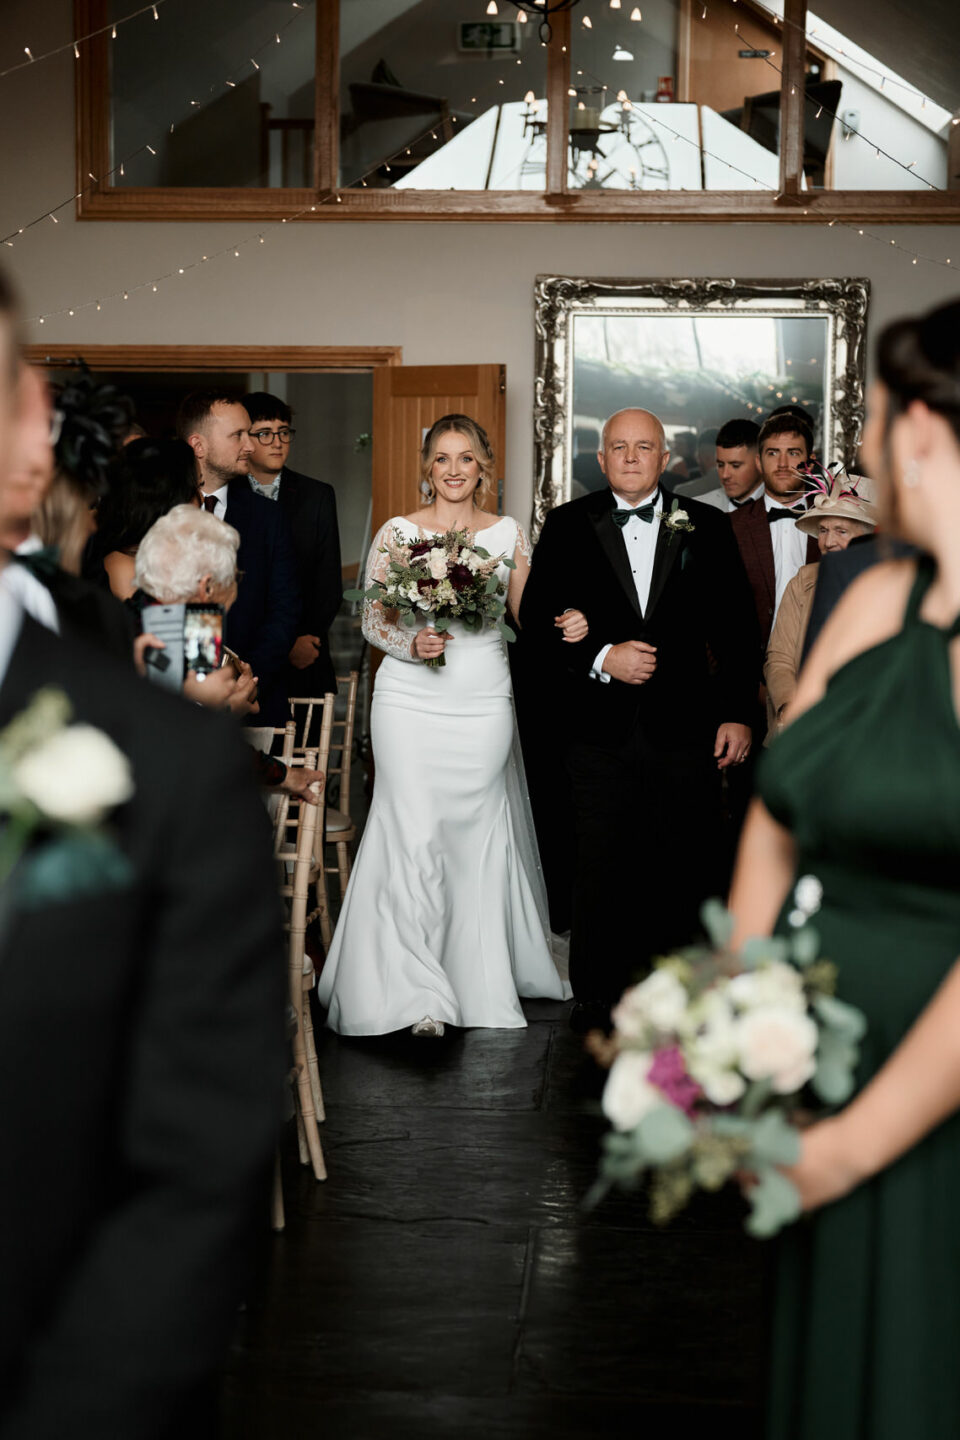 A woman being walked down the wedding aisle by her dad.